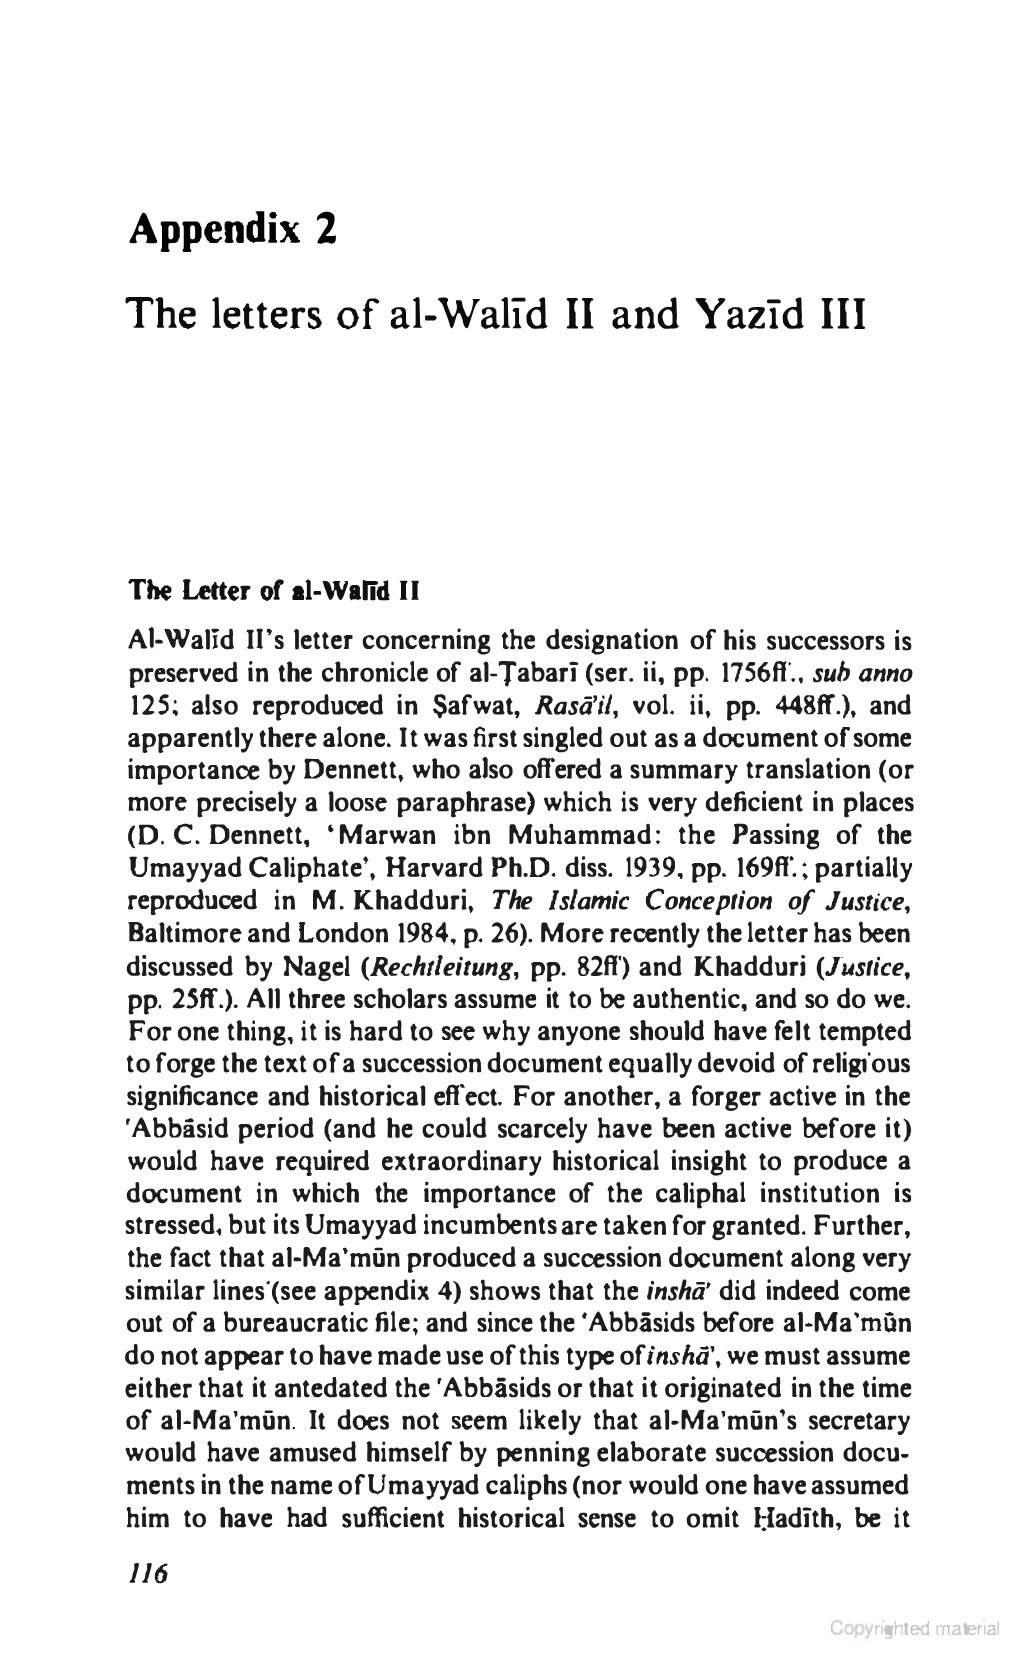 Appendix 2 the Letters of Al-Walid II and Yazld